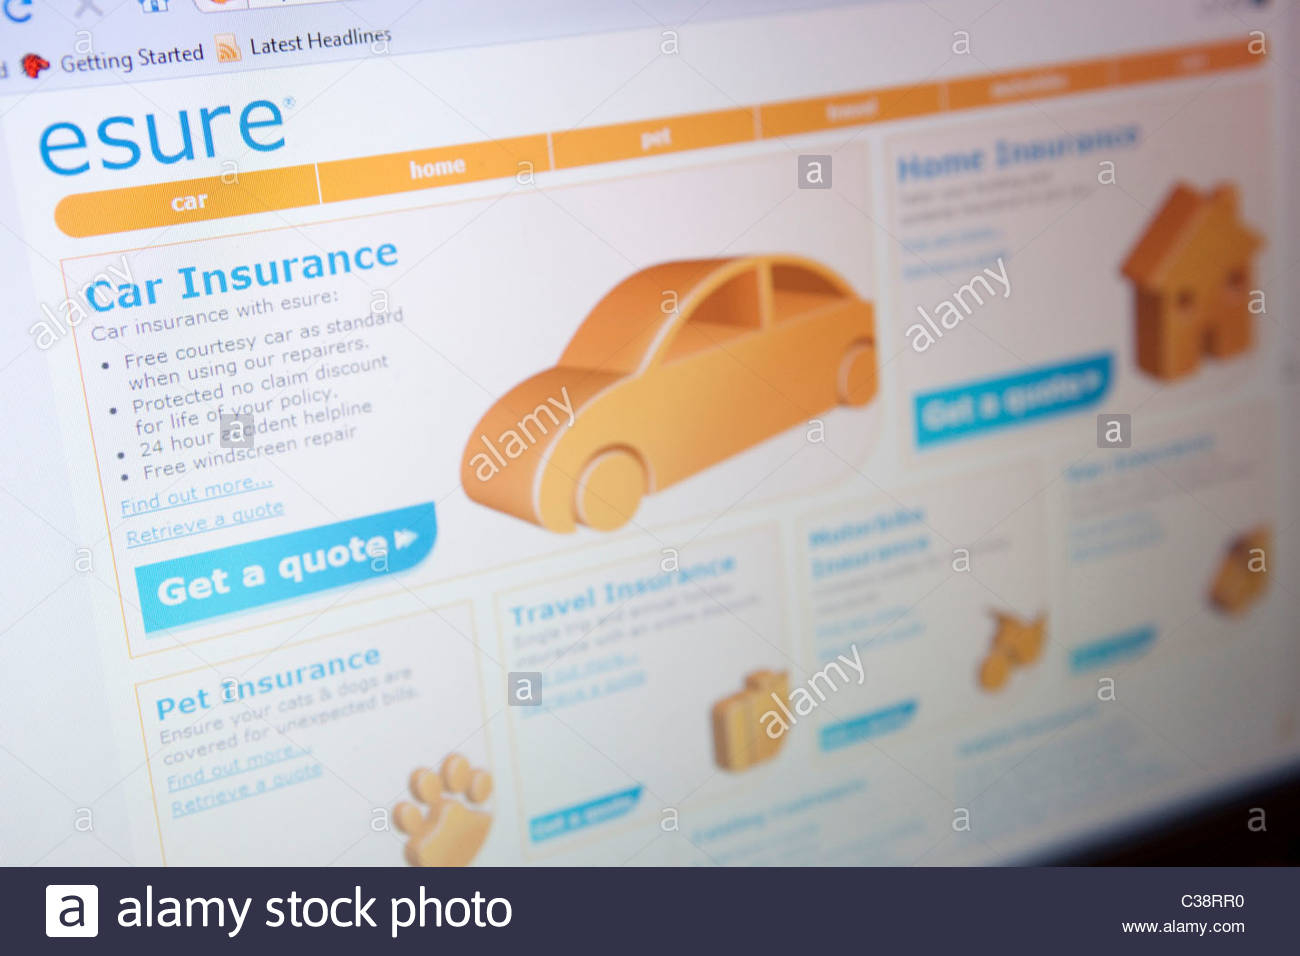 Esure Stock Photos Esure Stock Images Alamy intended for sizing 1300 X 956